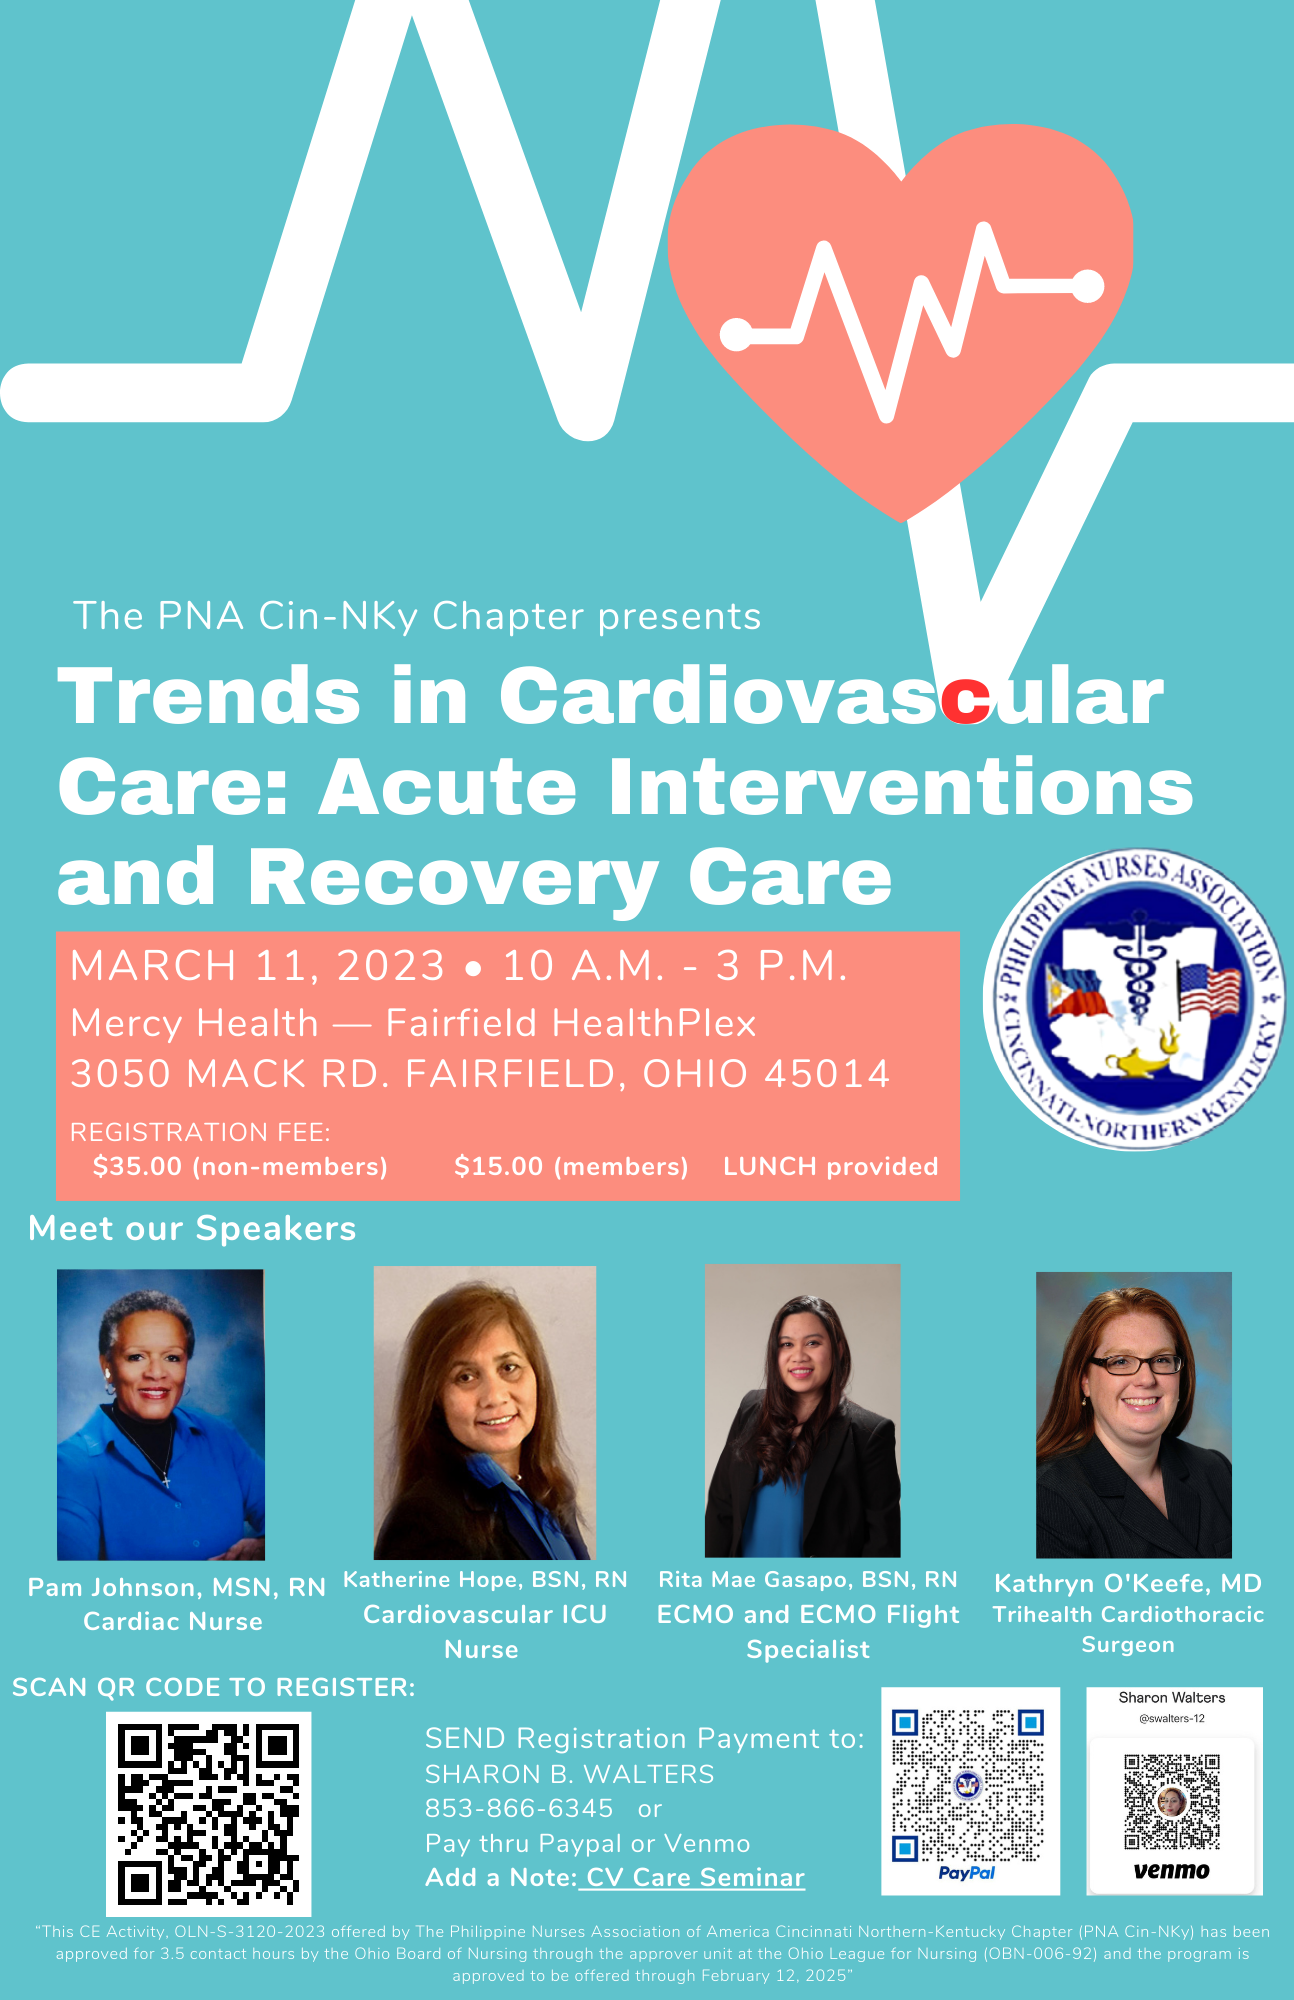 Trends in Cardiovascular Care: Acute Interventions and Recovery Care